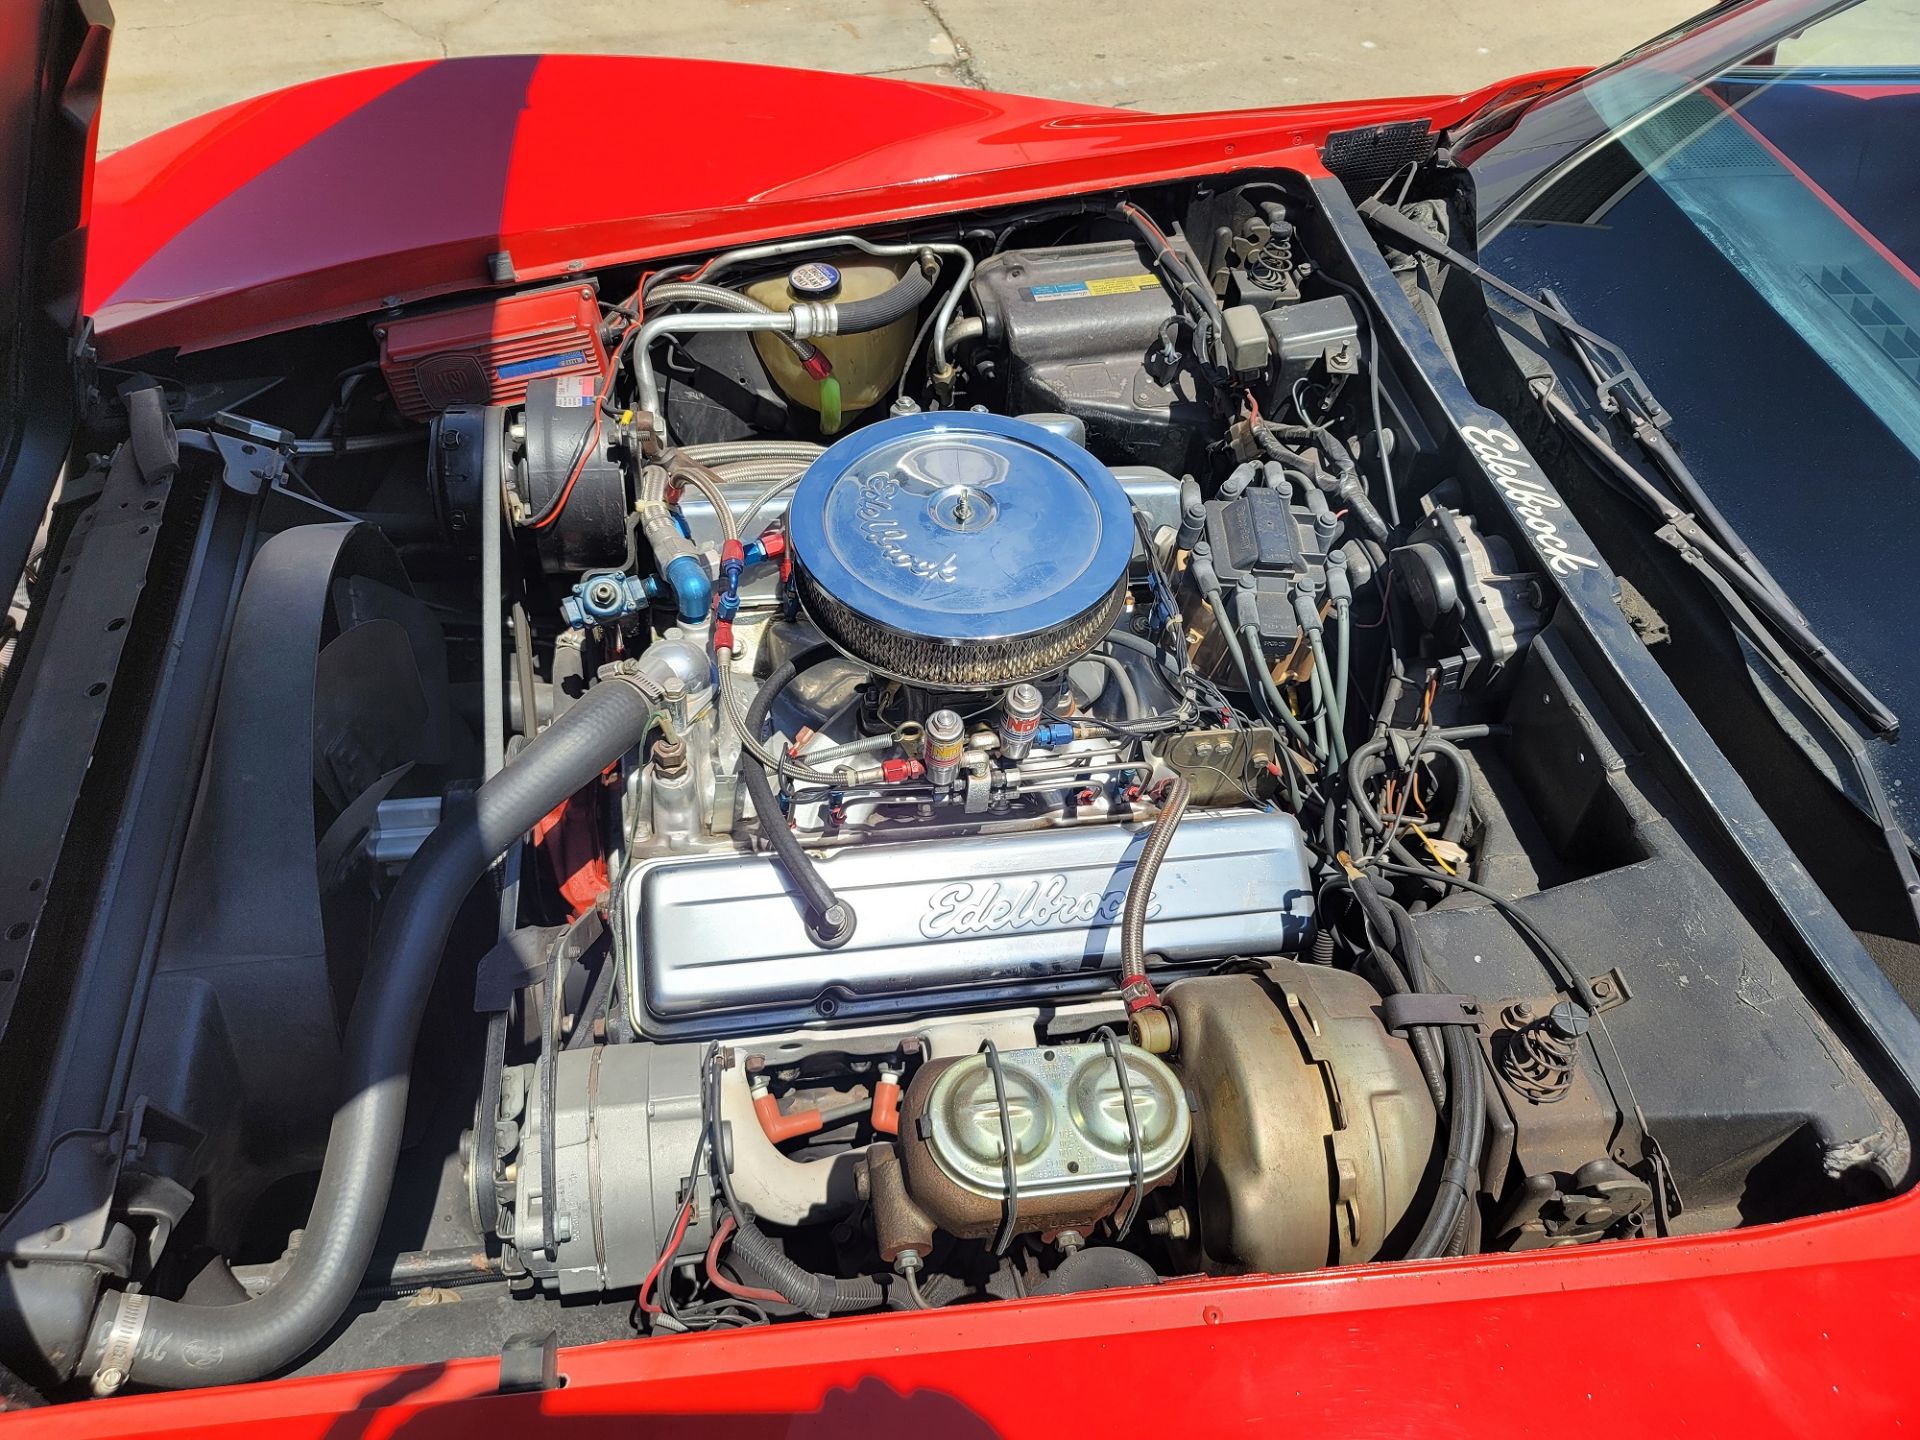 1980 CHEVROLET CORVETTE, WAS VIC EDELBROCK'S PERSONAL CAR BOUGHT FOR R&D, RED INTERIOR, TITLE ONLY. - Image 27 of 70